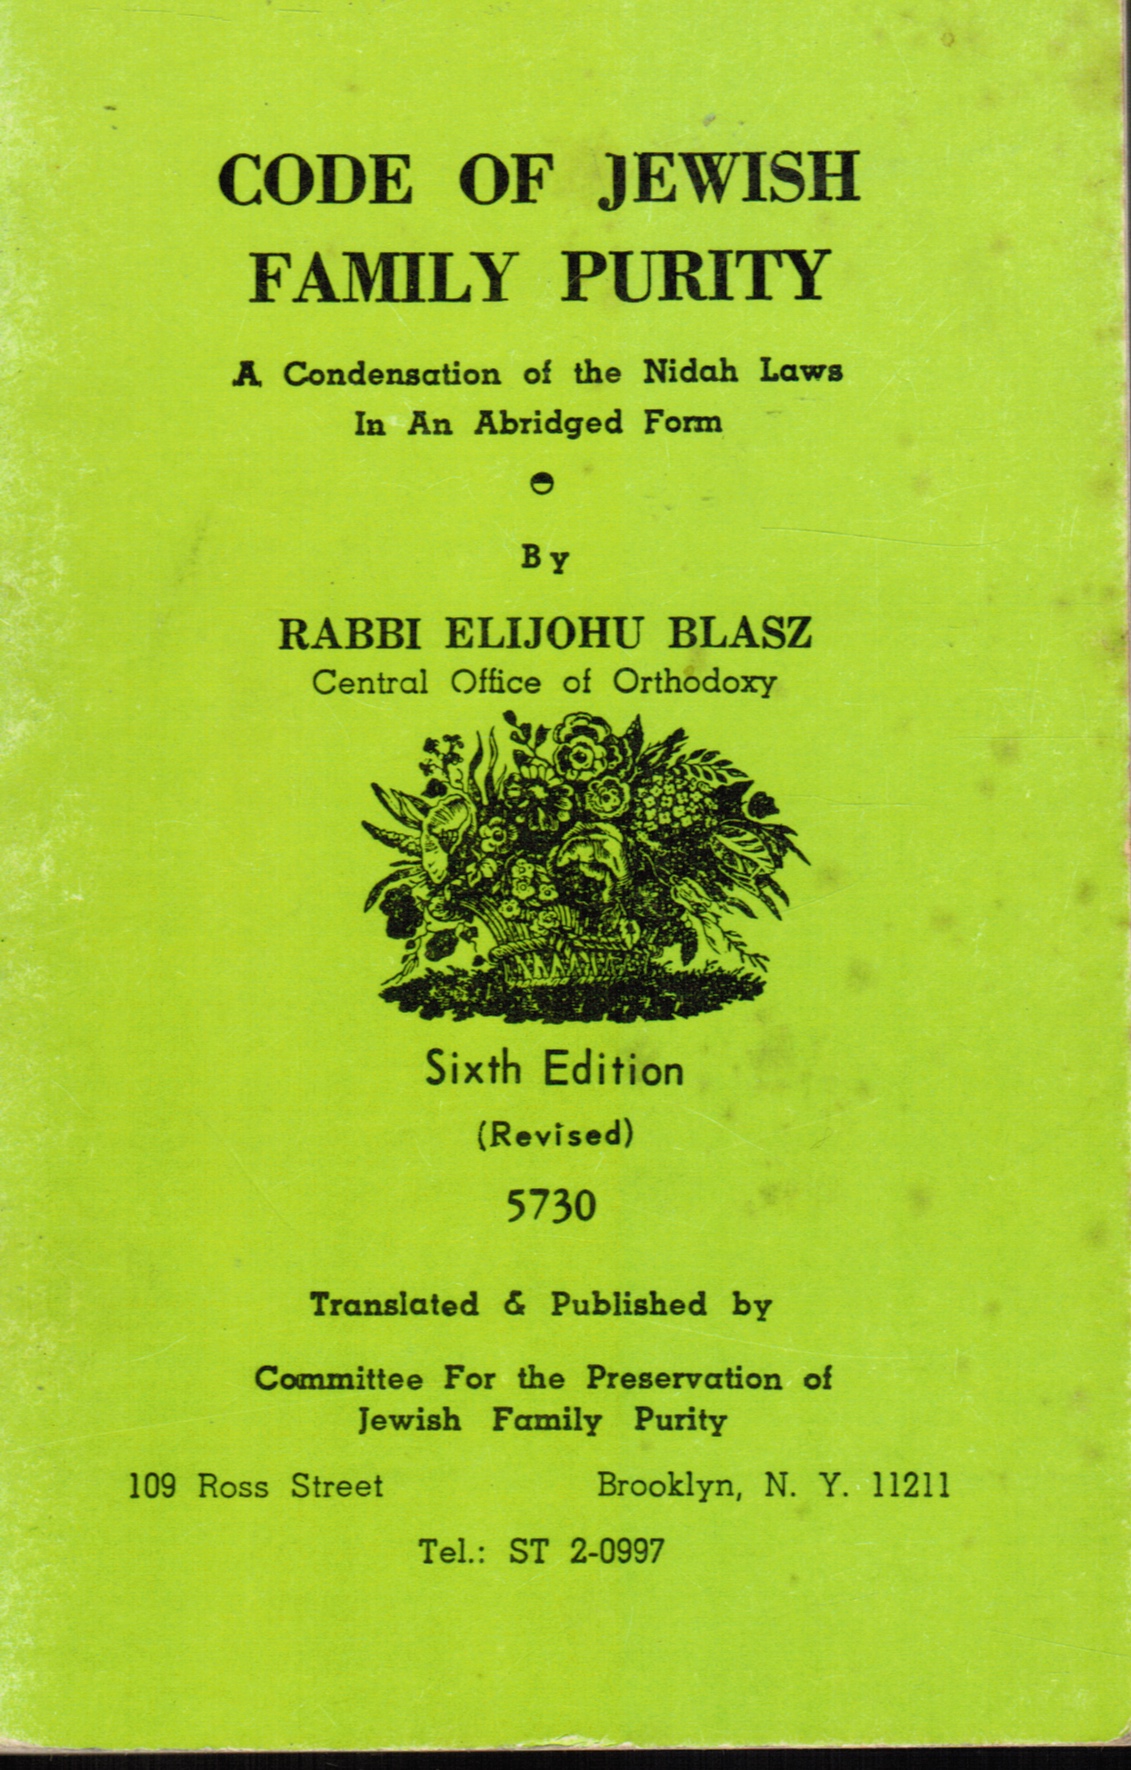 BLASZ, RABBI ELIJOHU - Code of Jewish Family Purity: A Condensation of the Nidah Laws in an Abridged Form